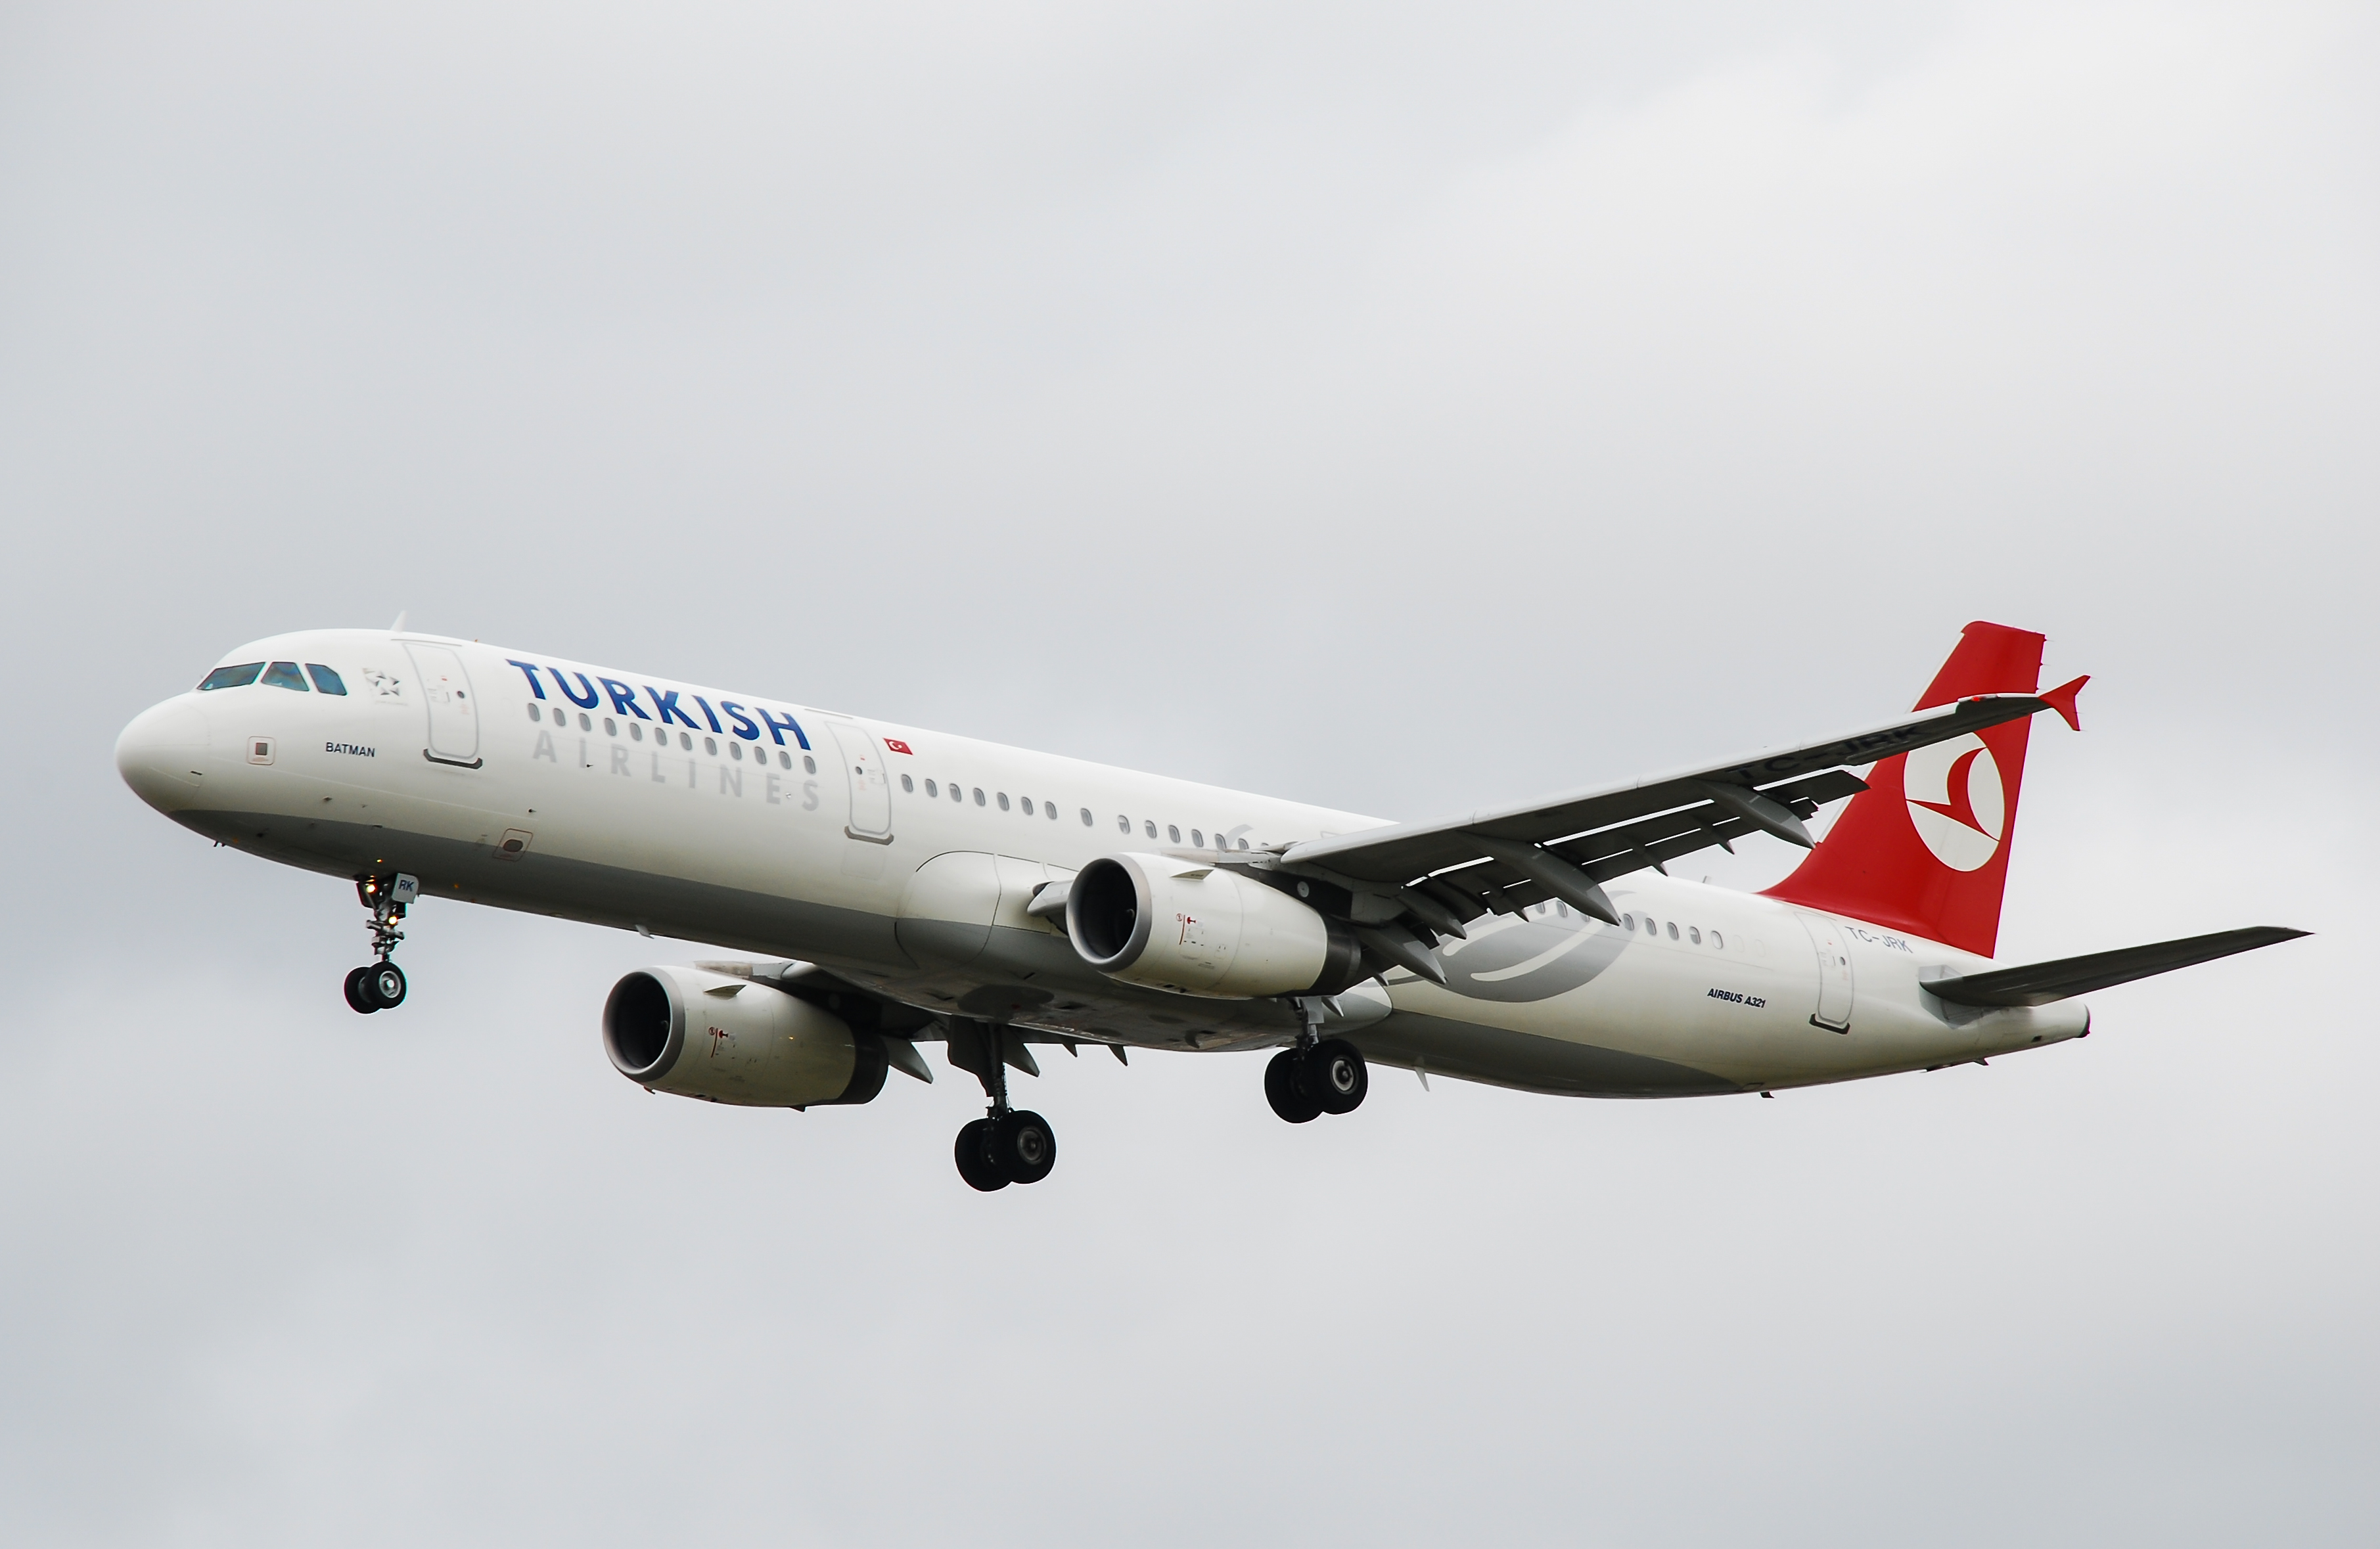 TC-JRK/TCJRK THY Turkish Airlines Airbus A321 Airframe Information - AVSpotters.com